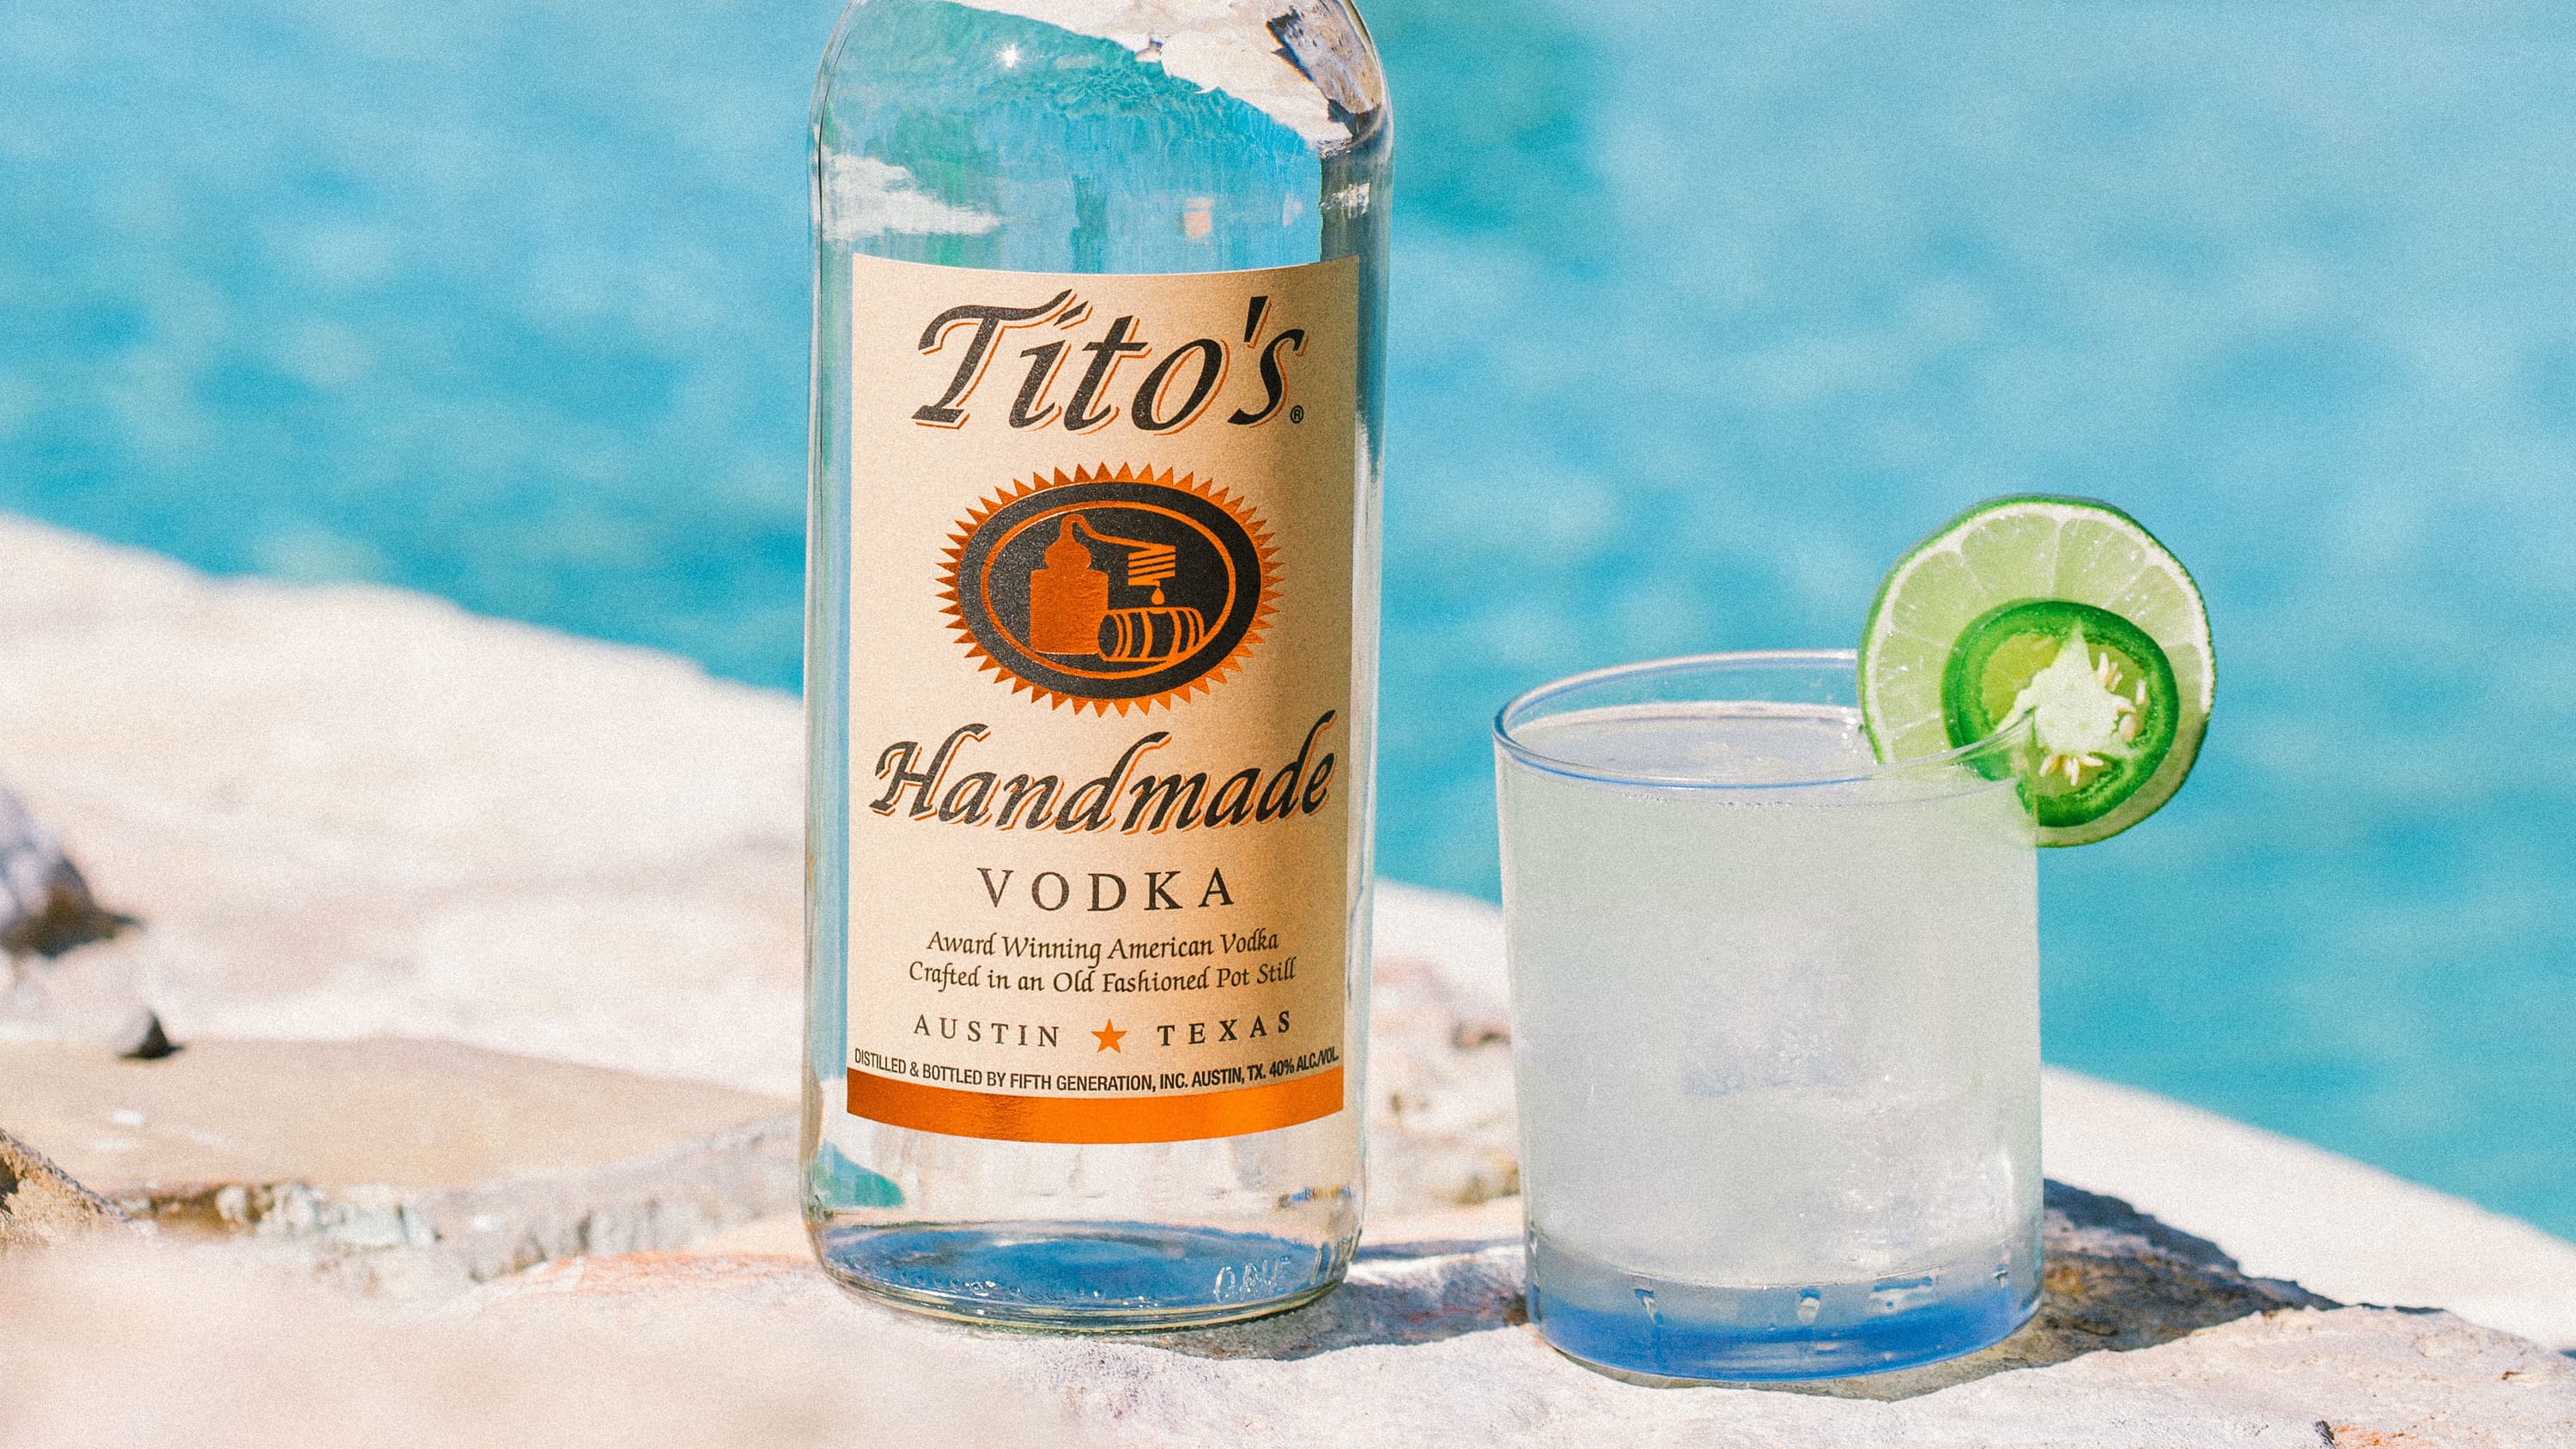 Summer Heat cocktail garnished with a lime and jalapeno next to a Tito's Vodka bottle in front of a swimming pool